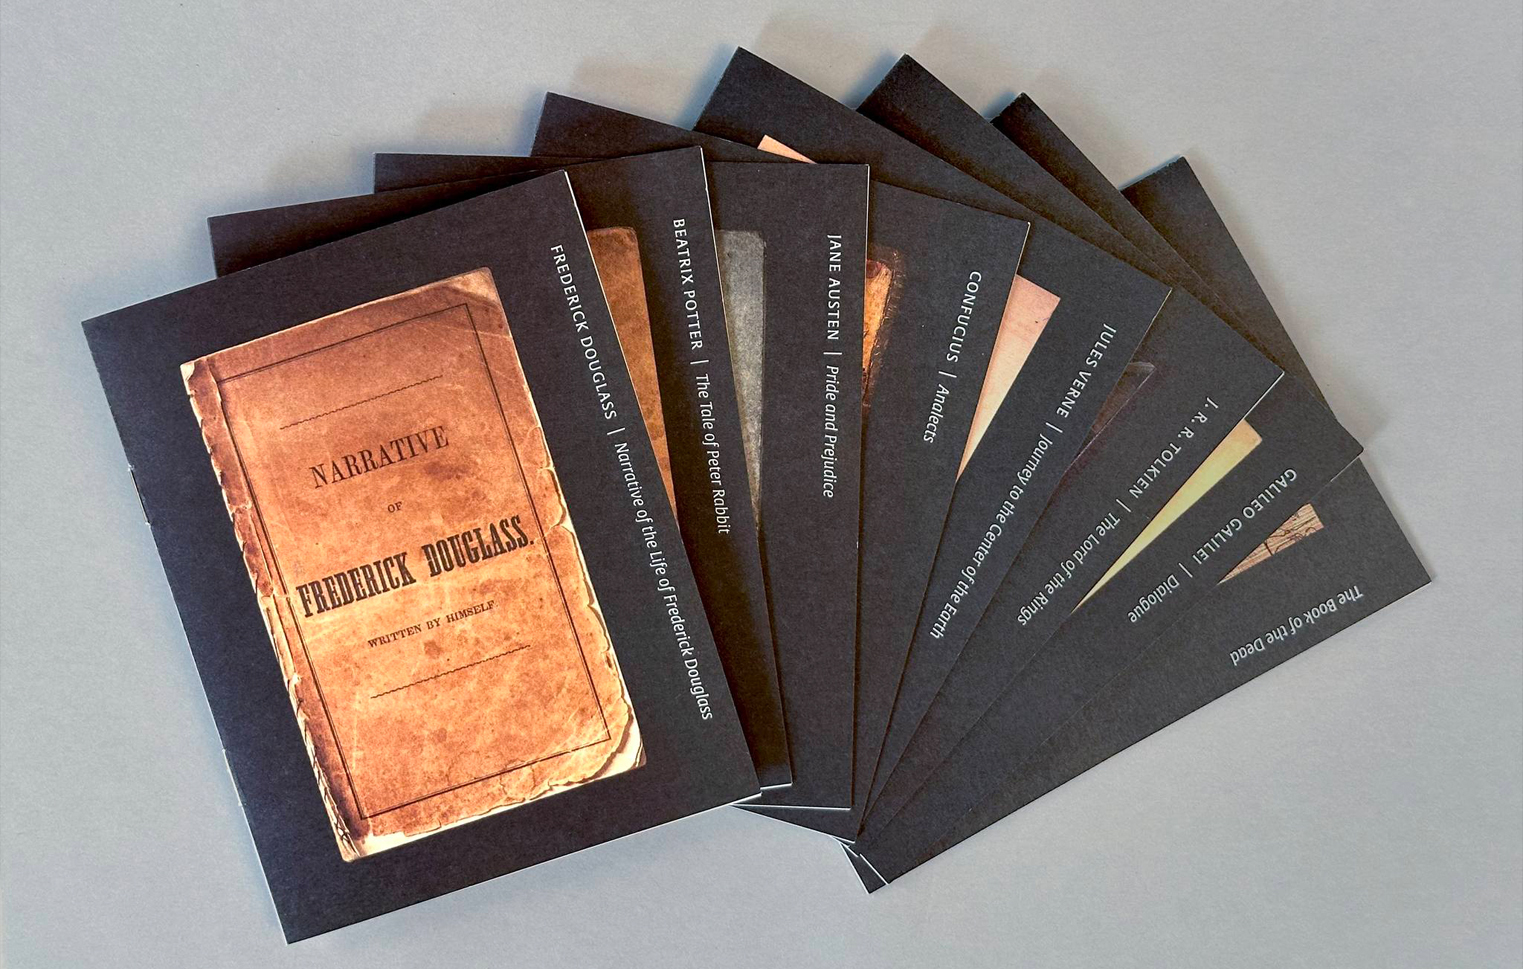 The eight giveaway booklets. Each highlights a particular book and author.